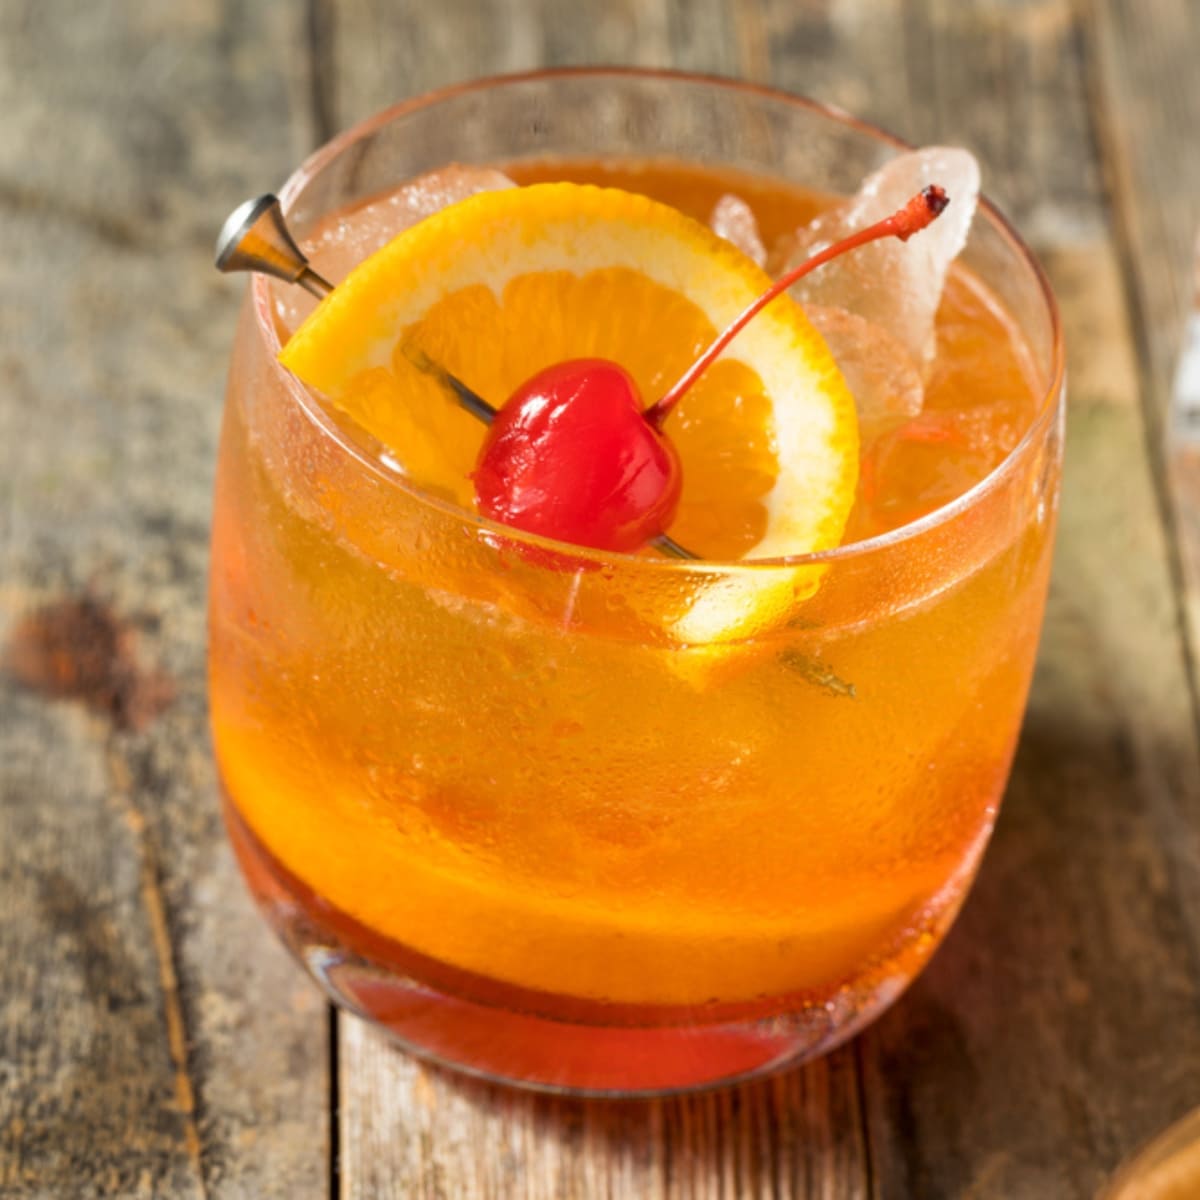 Ice Cold Wisconsin Old-Fashioned Garnished With Orang Sliced and Cherry